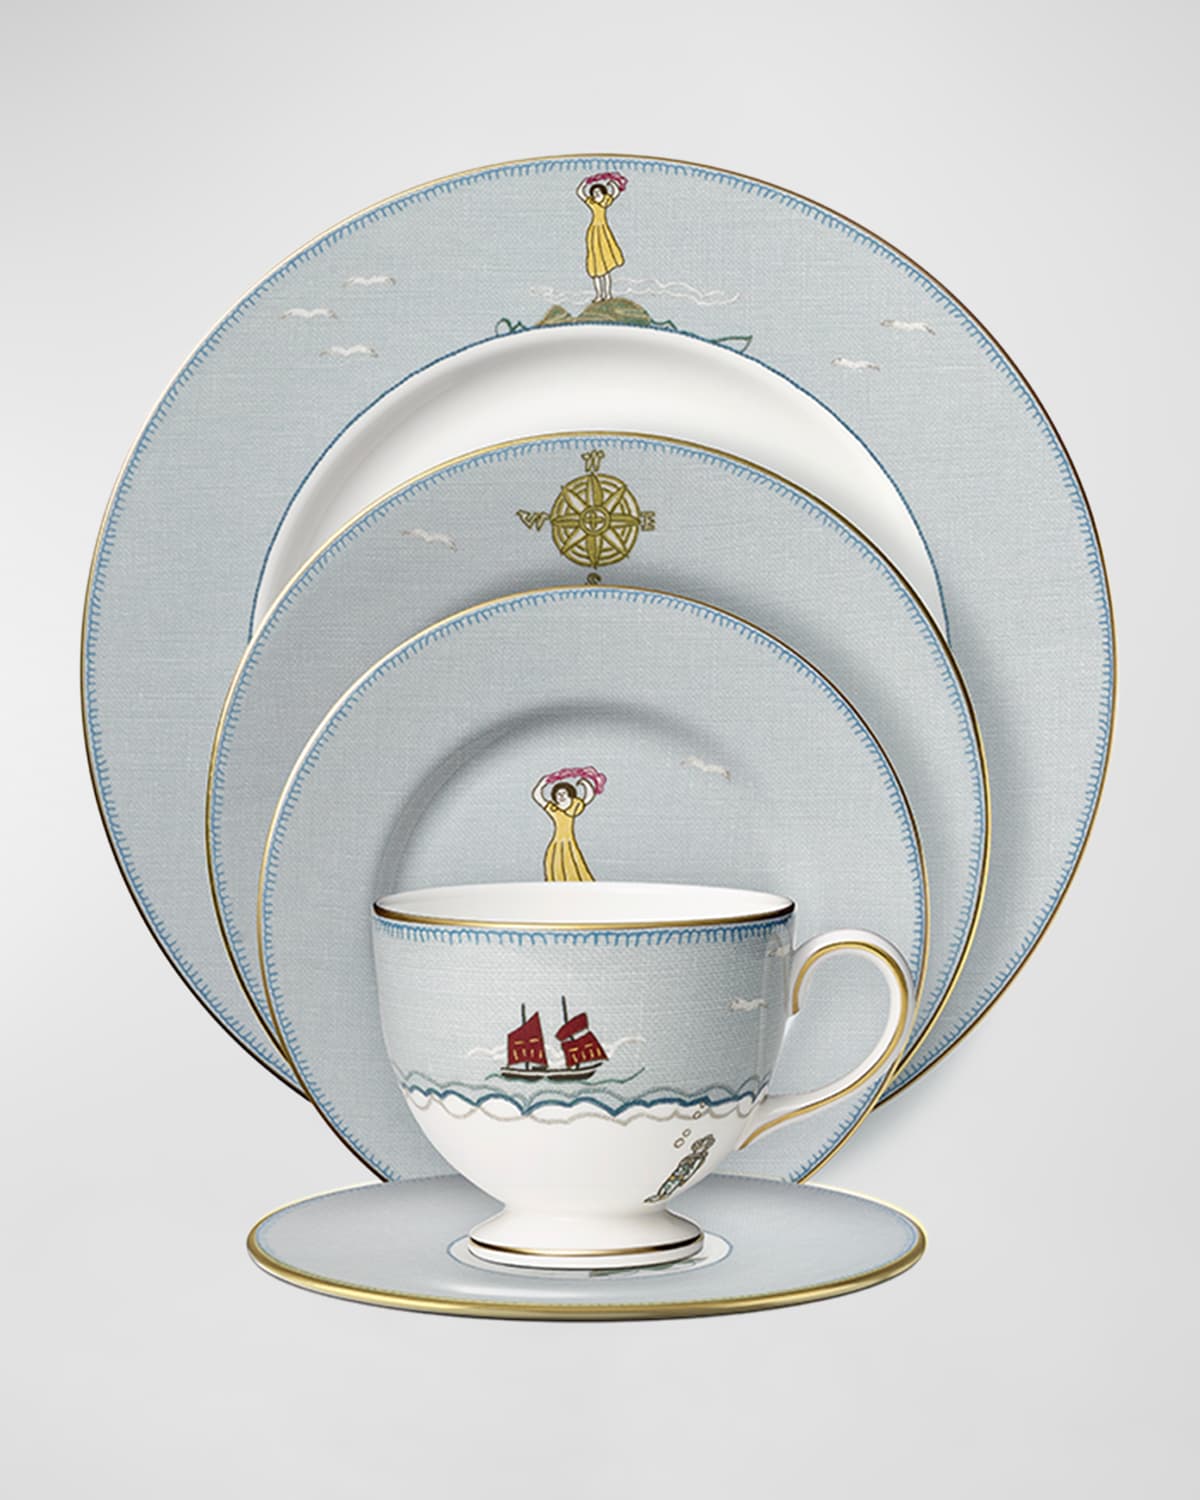 WEDGWOOD SAILOR'S FAREWELL 5-PIECE PLACE SETTING